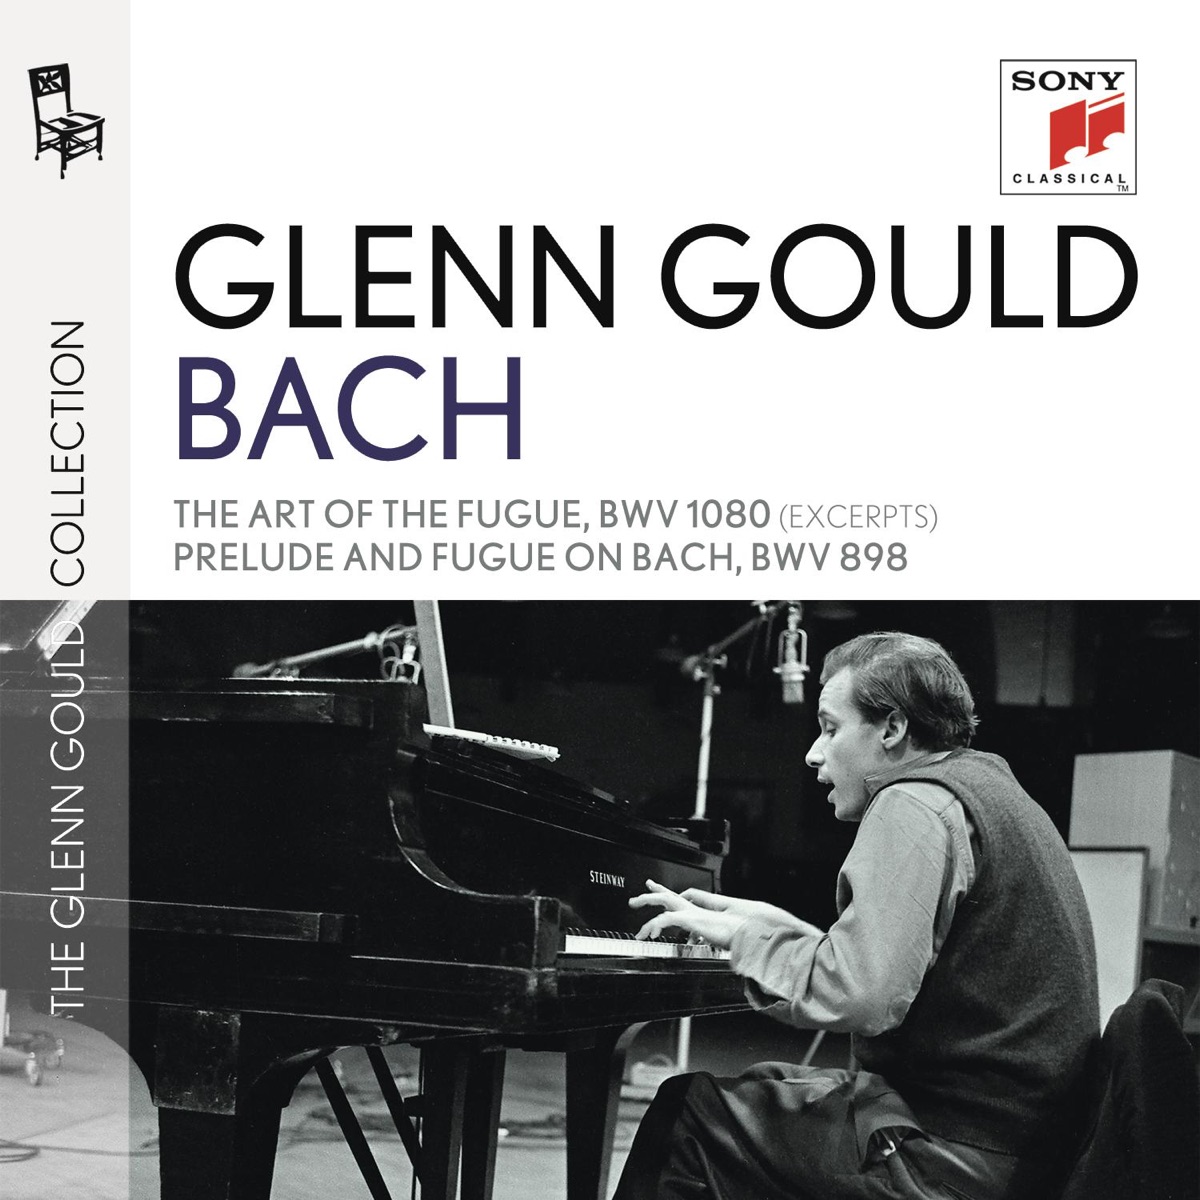 ‎Glenn Gould Edition - Bach: The Art of the Fugue (Excerpts), Prelude and  Fugue on BACH, BWV 898 by Glenn Gould on Apple Music